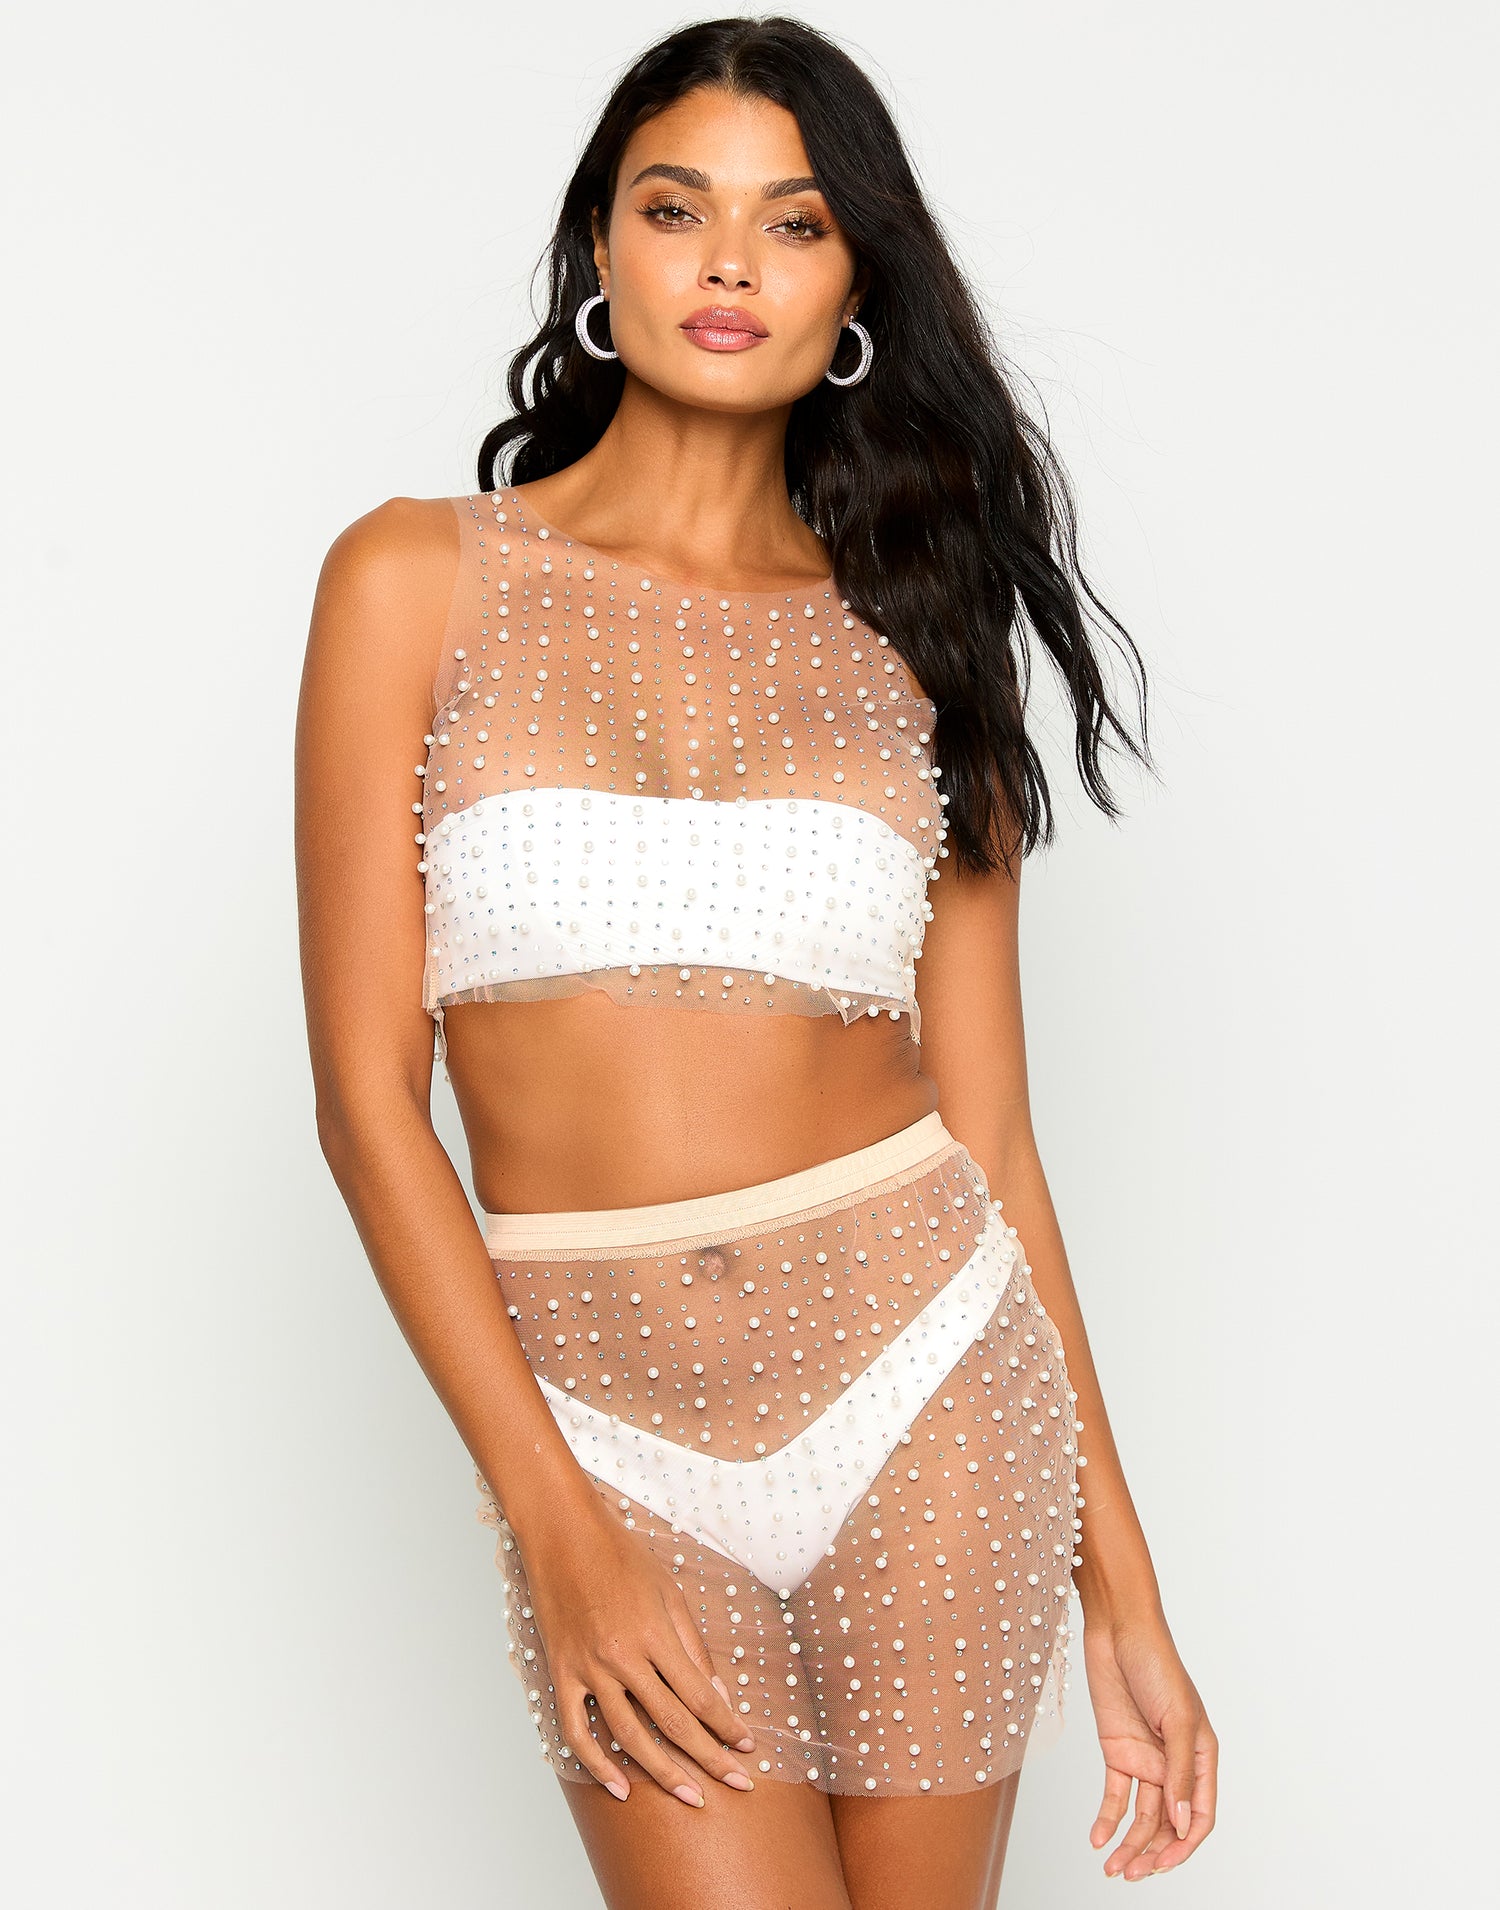 Glitzy Girl Mesh Pearl Cover Up Top & Skirt Set in Nude with Rhinestone Detail - Alternate Front View